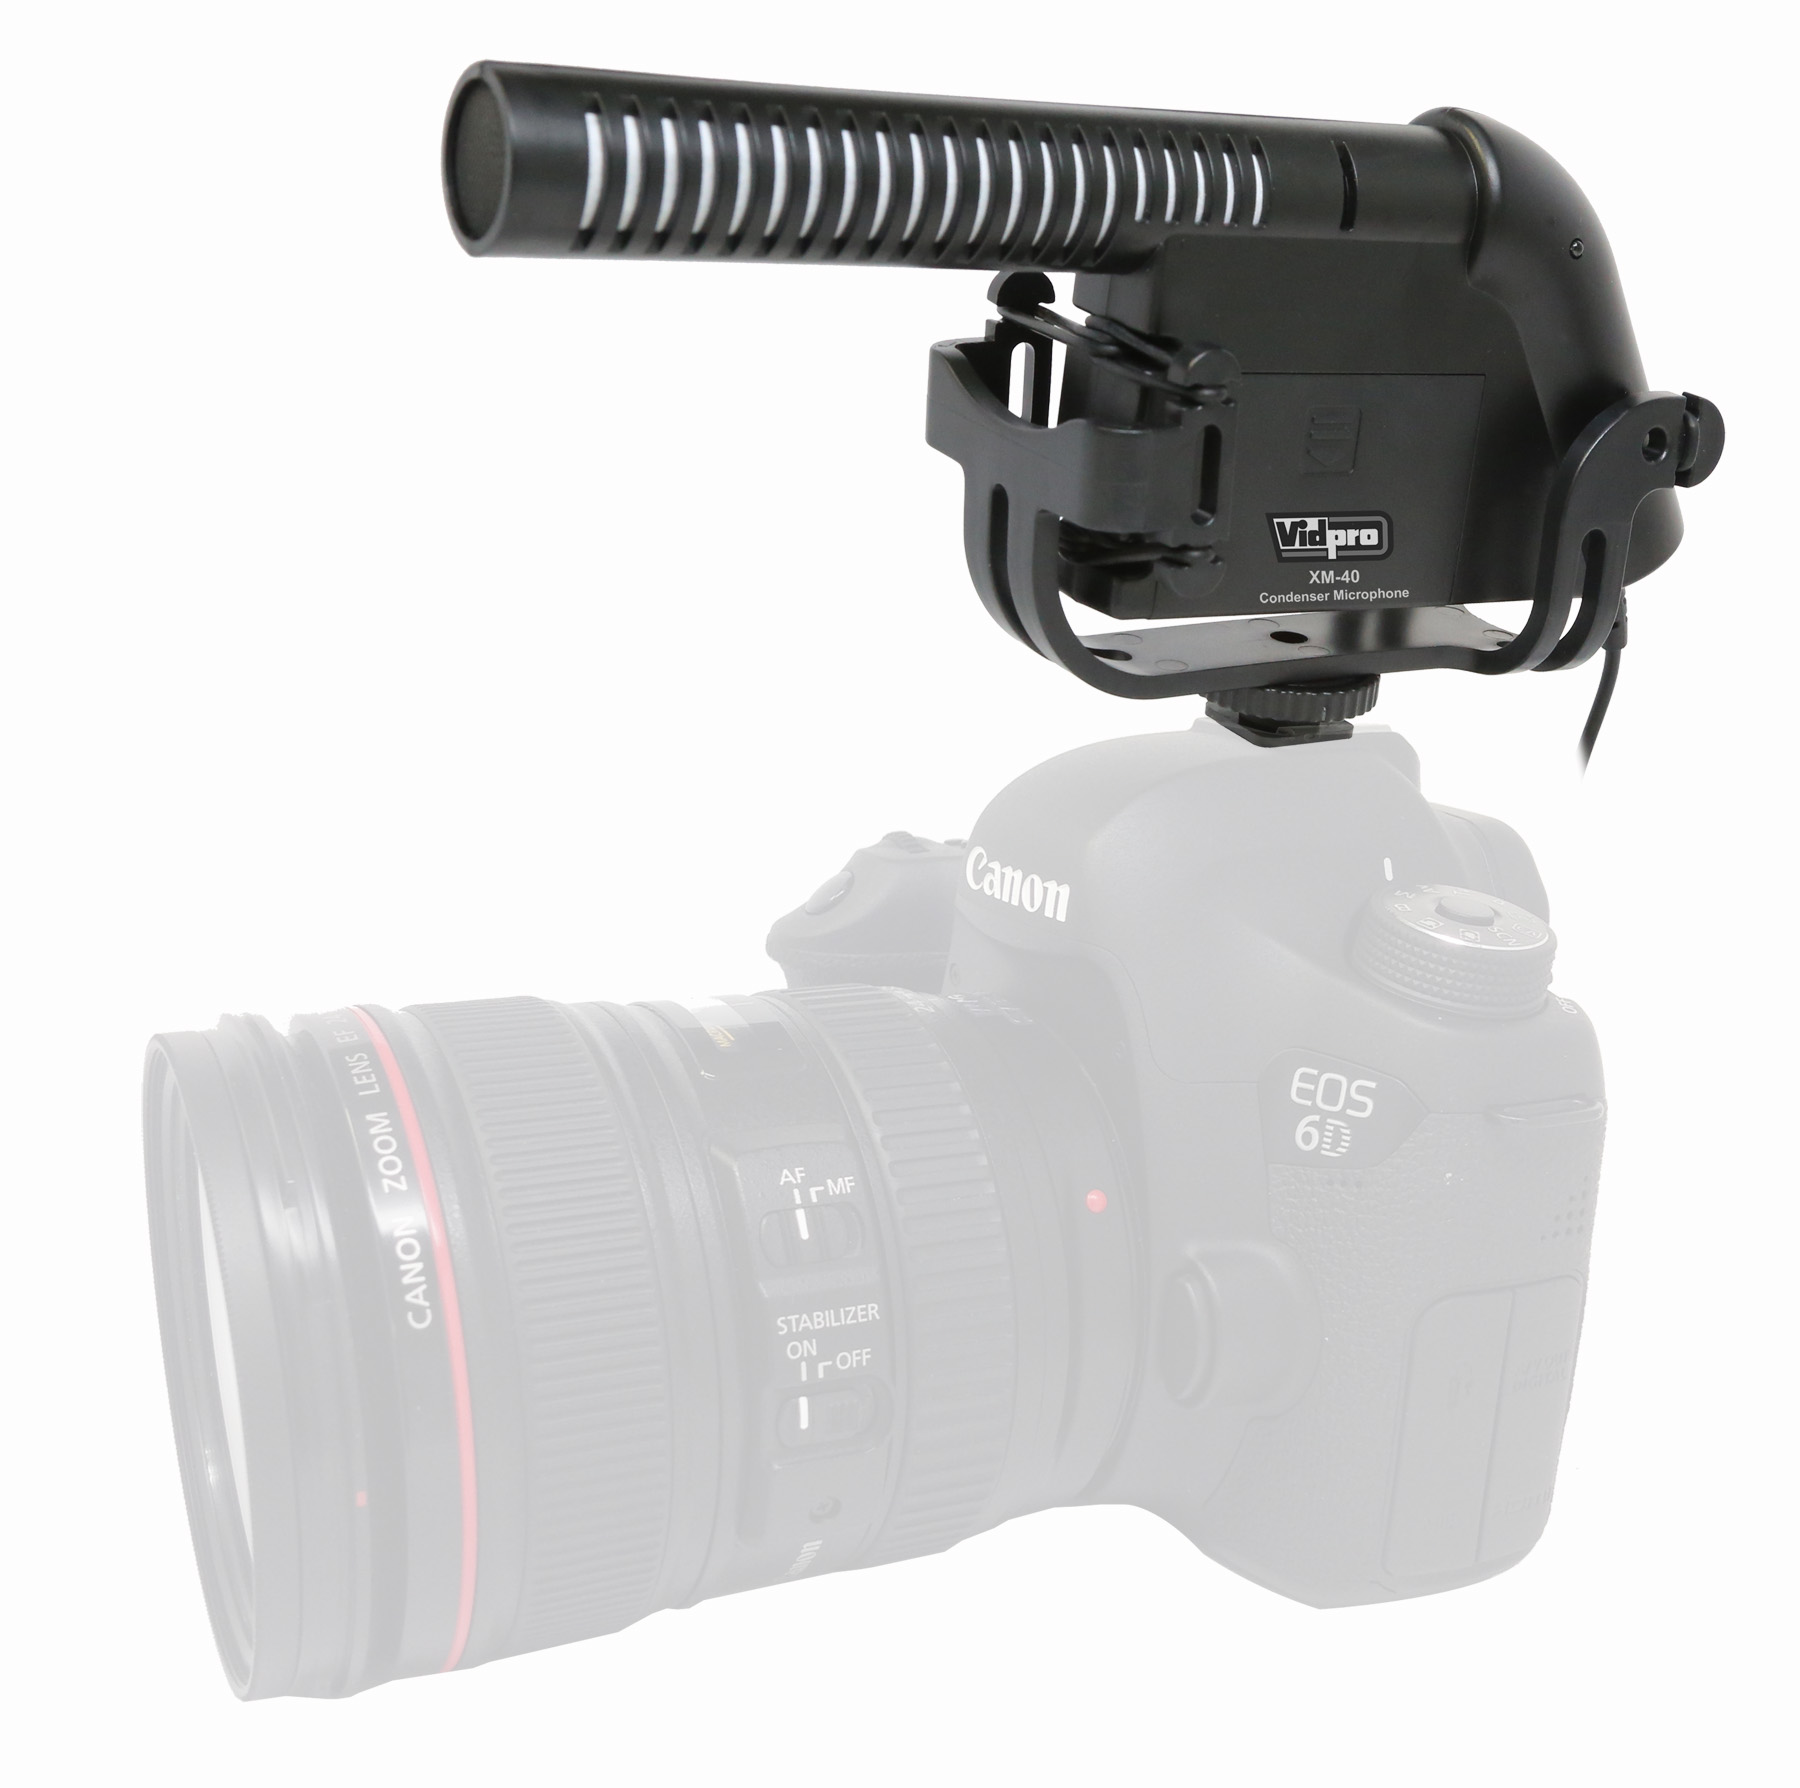 External Microphone for ZoomCamcorder